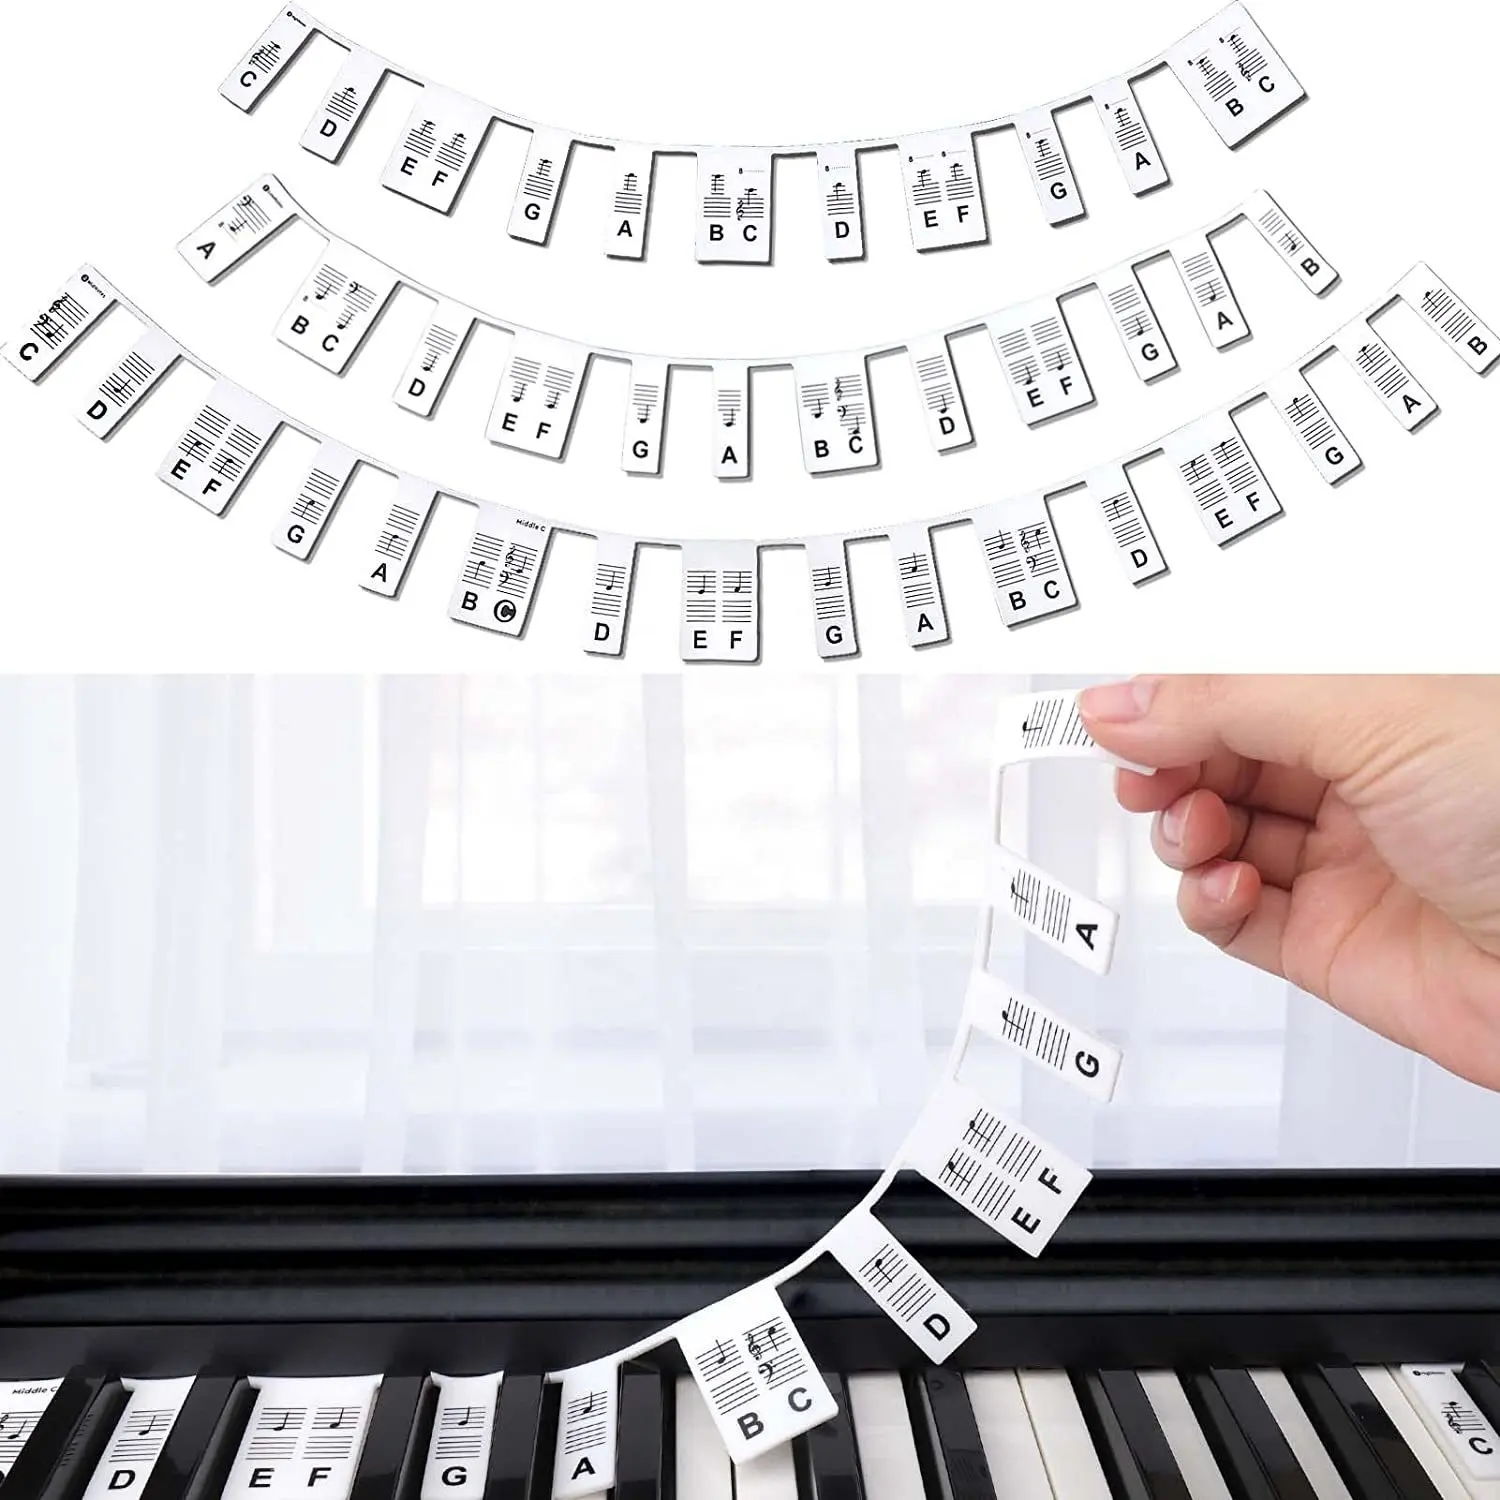 New Hot Sales Removable Piano Full 88 Keyboard Note Labels Silicone Strips Guide for Learning Comes with Box